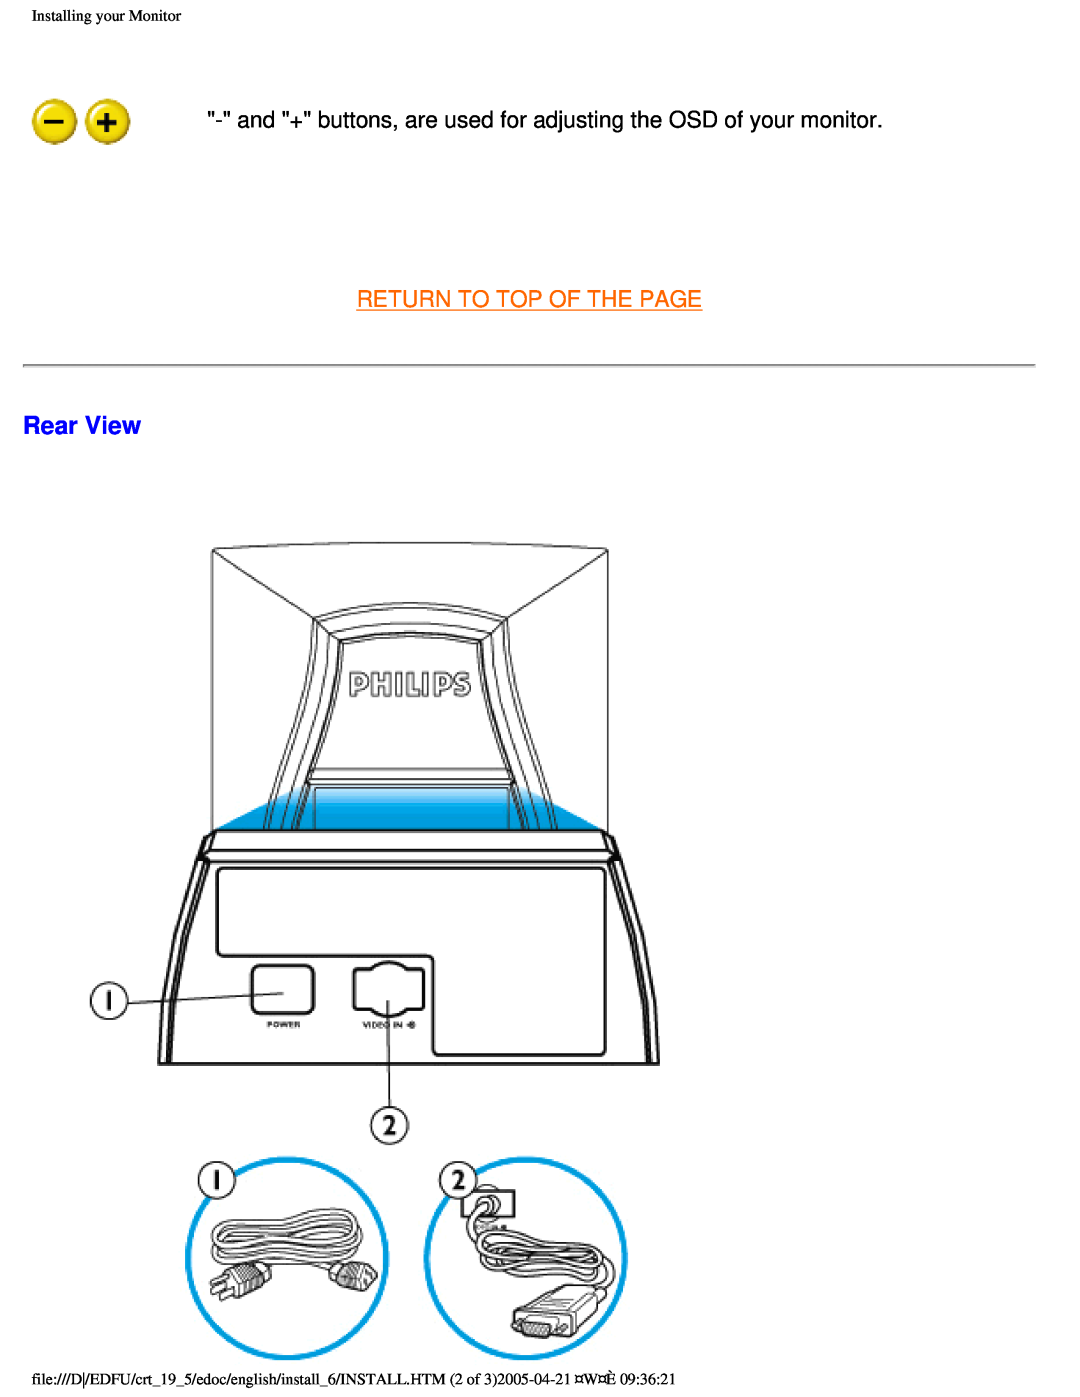 Philips 109F user manual Rear View, Return To Top Of The Page, Installing your Monitor 